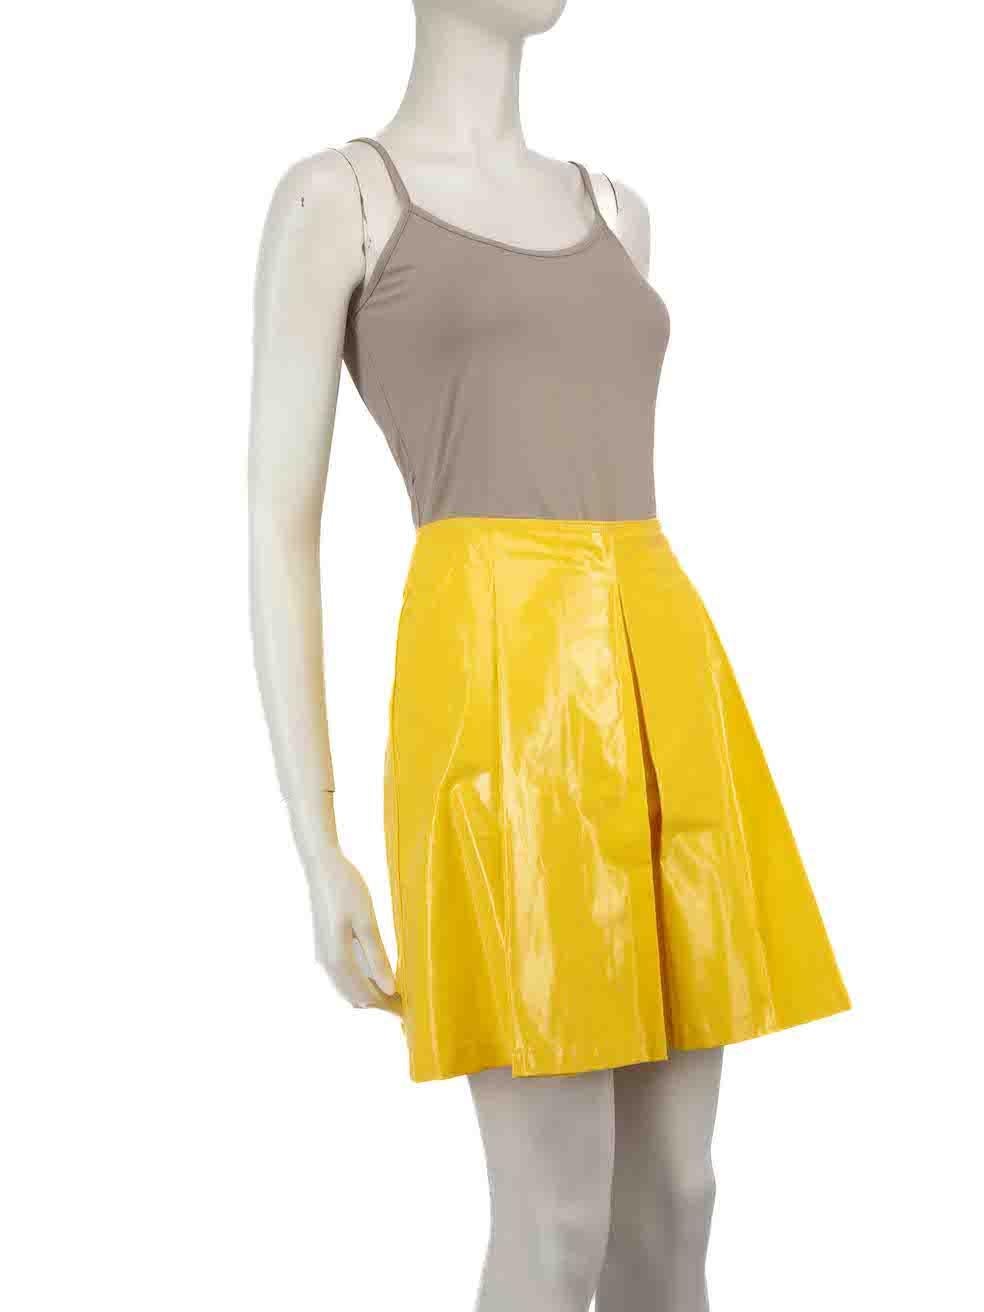 CONDITION is Very good. Minimal wear to skirt is evident. Minimal discolouration to centre front, left pocket and rear. Small scratches are seen front on this used Prada Sports designer resale item.
 
 
 
 Details
 
 
 Yellow
 
 Resin coated cotton
